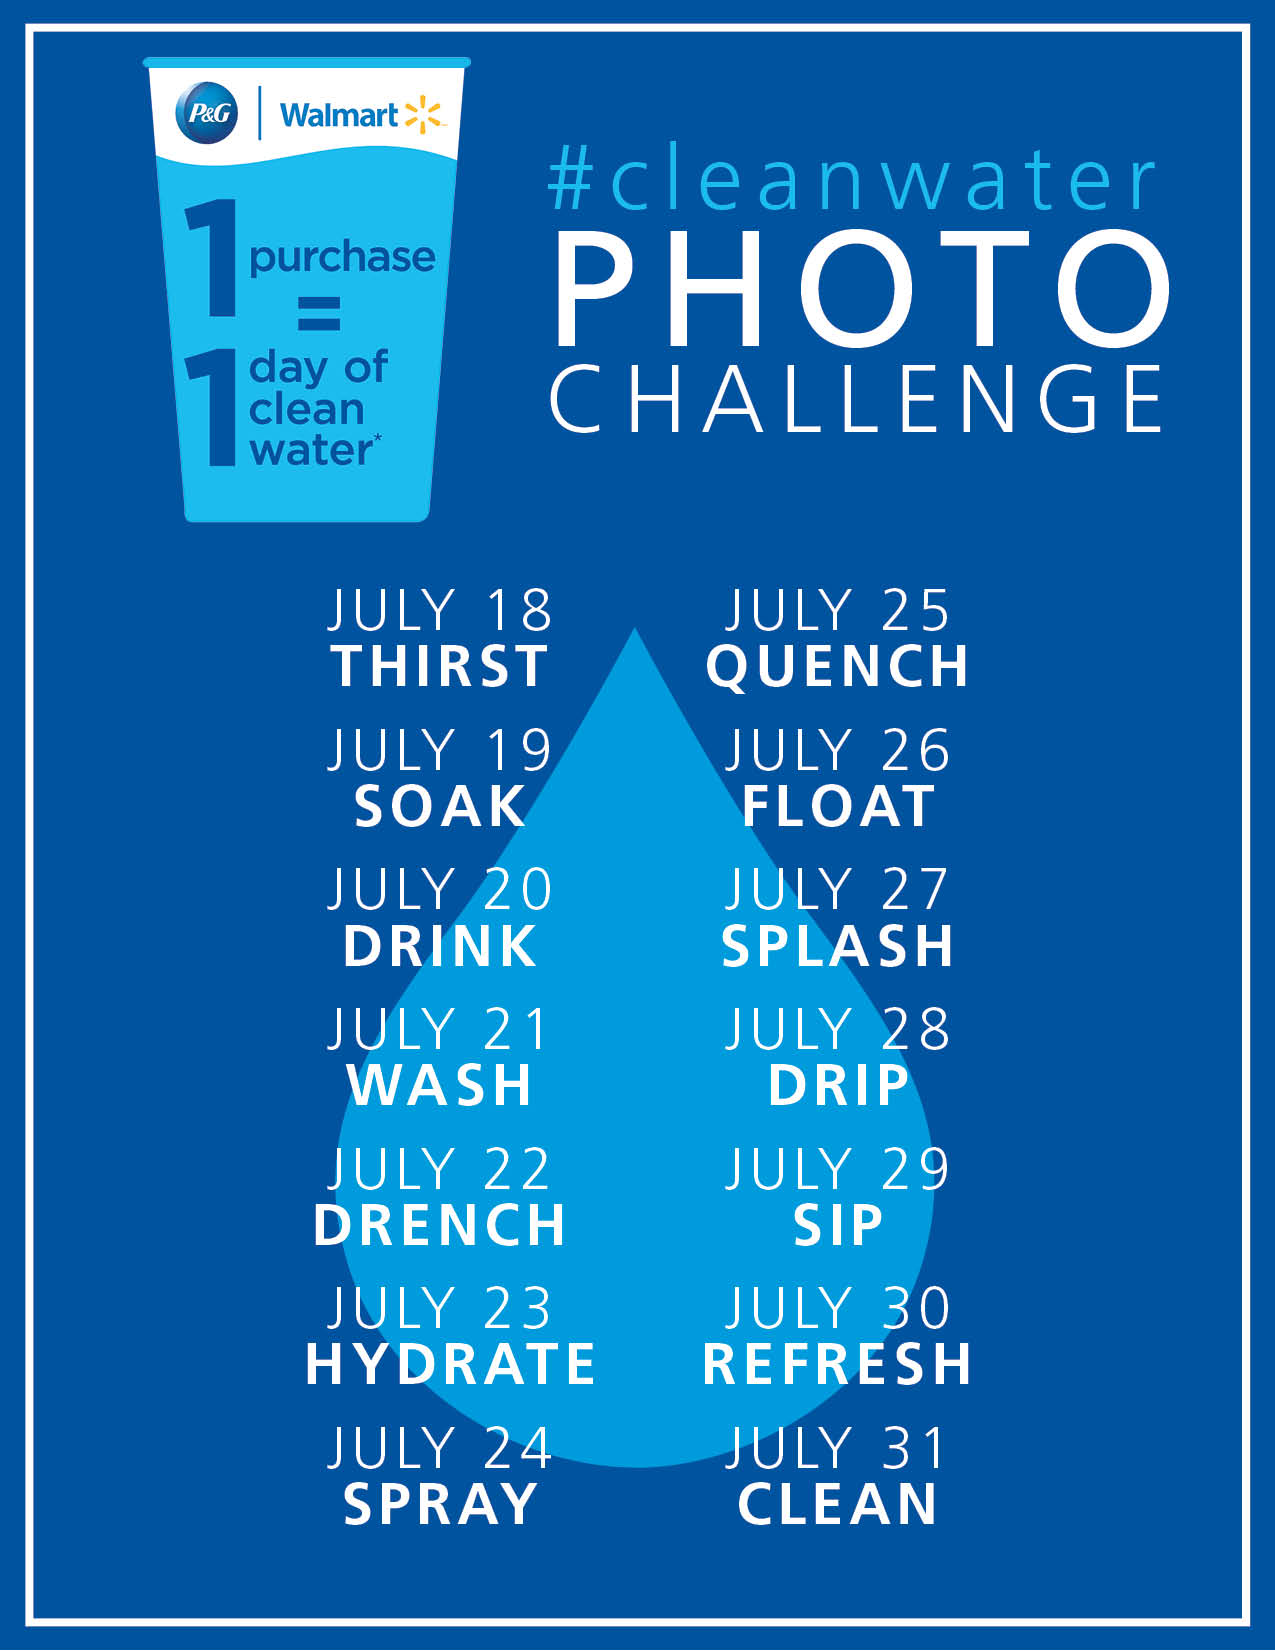 cleanwater photo challenge